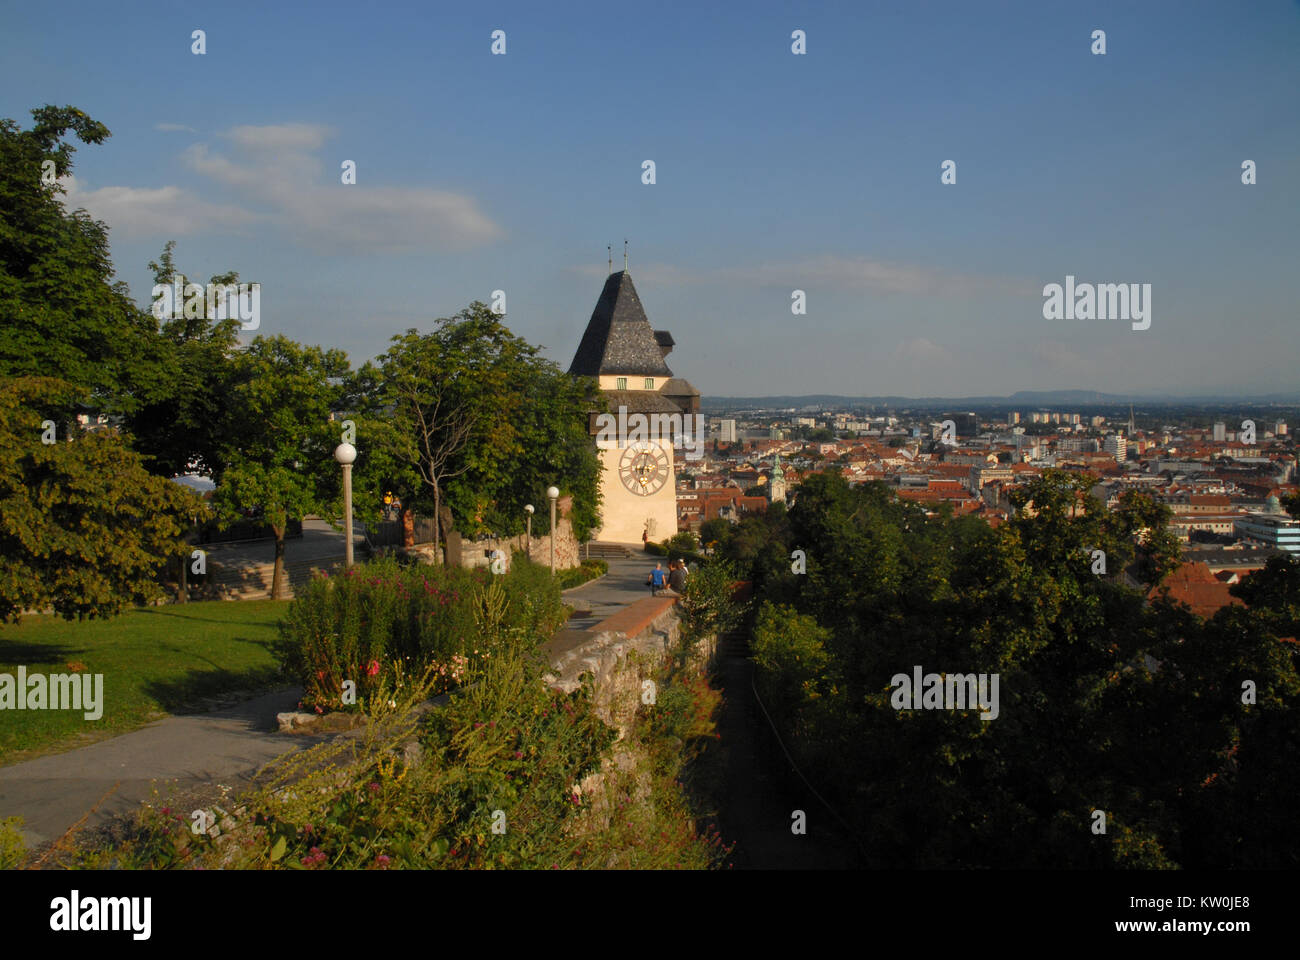 View of Uhrturm and the City of Graz from Schlossberg Stock Photo